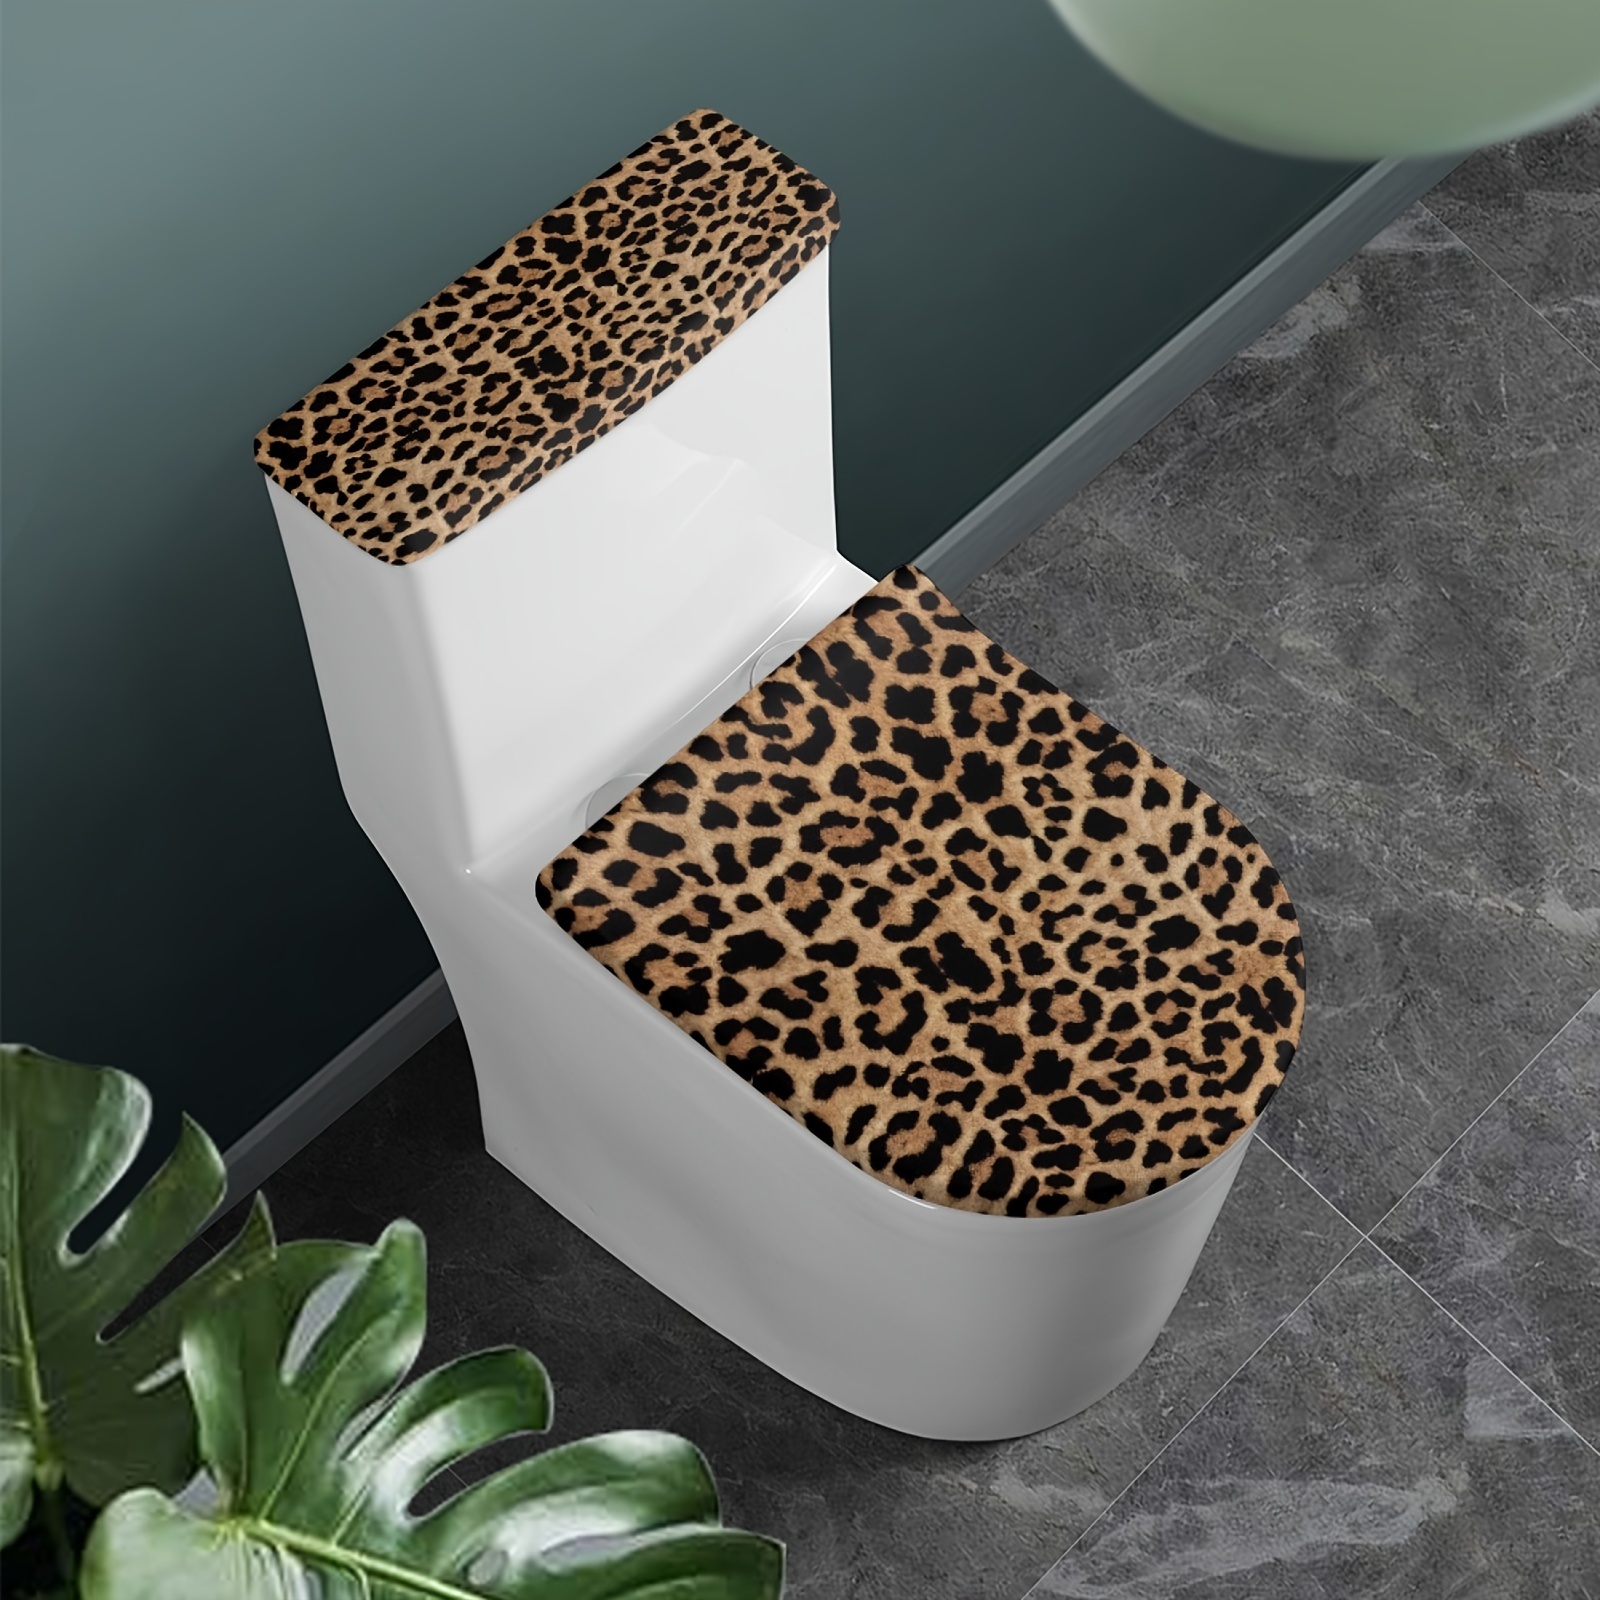 

1set Leopard Pattern Toilet Lid Cover And Toilet Tank Cover, Toilet Seat Covers Dust Cover Stretch Toilet Cover Set For Bathroom, Fits Most Size Toilet Tanks & Lids, Home Decor Supplies